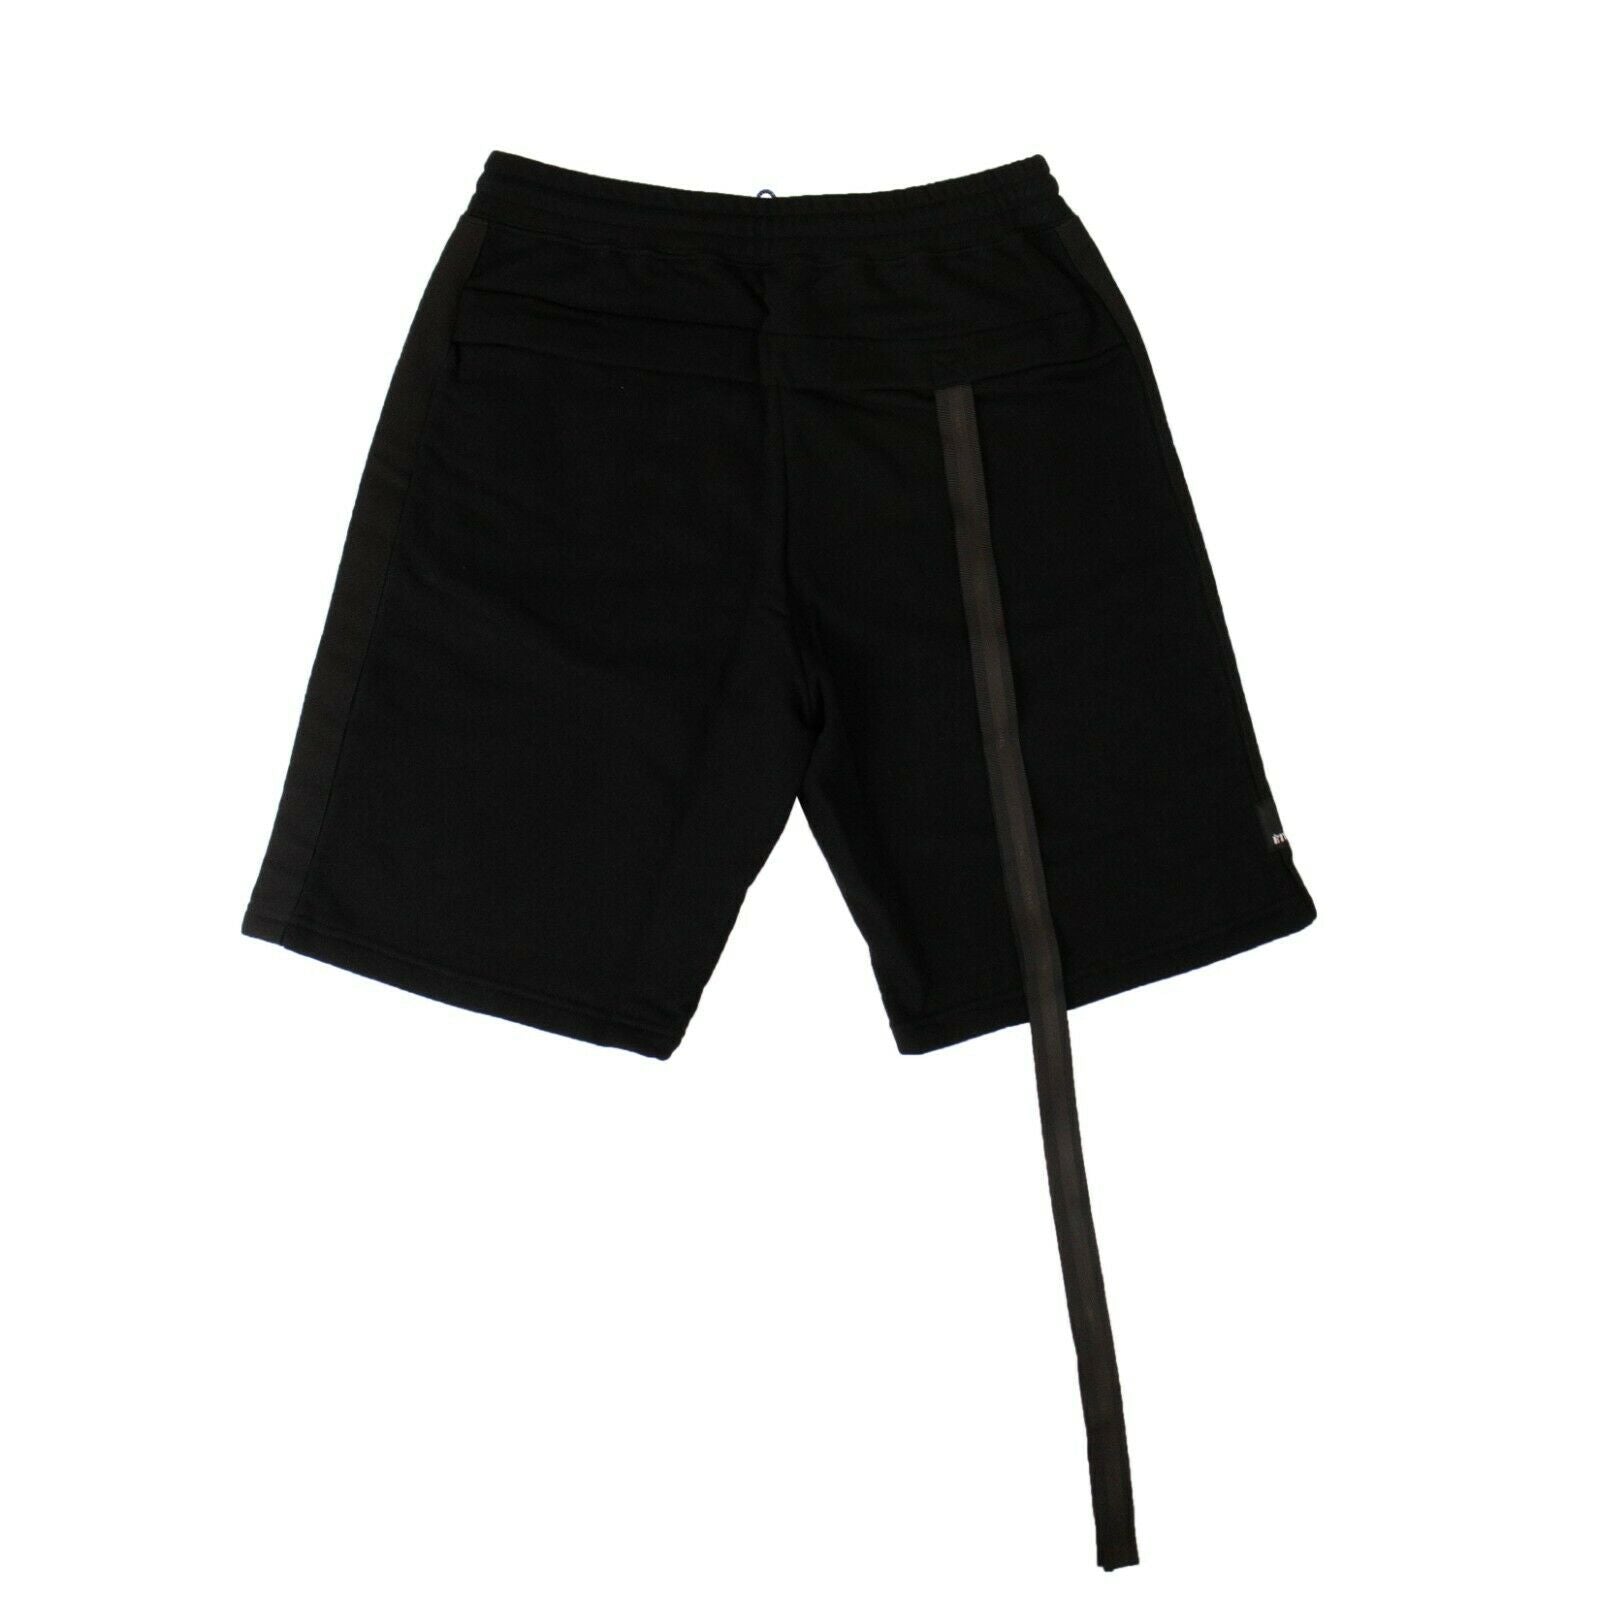 Unravel Project Taped Basketball Shorts - Black